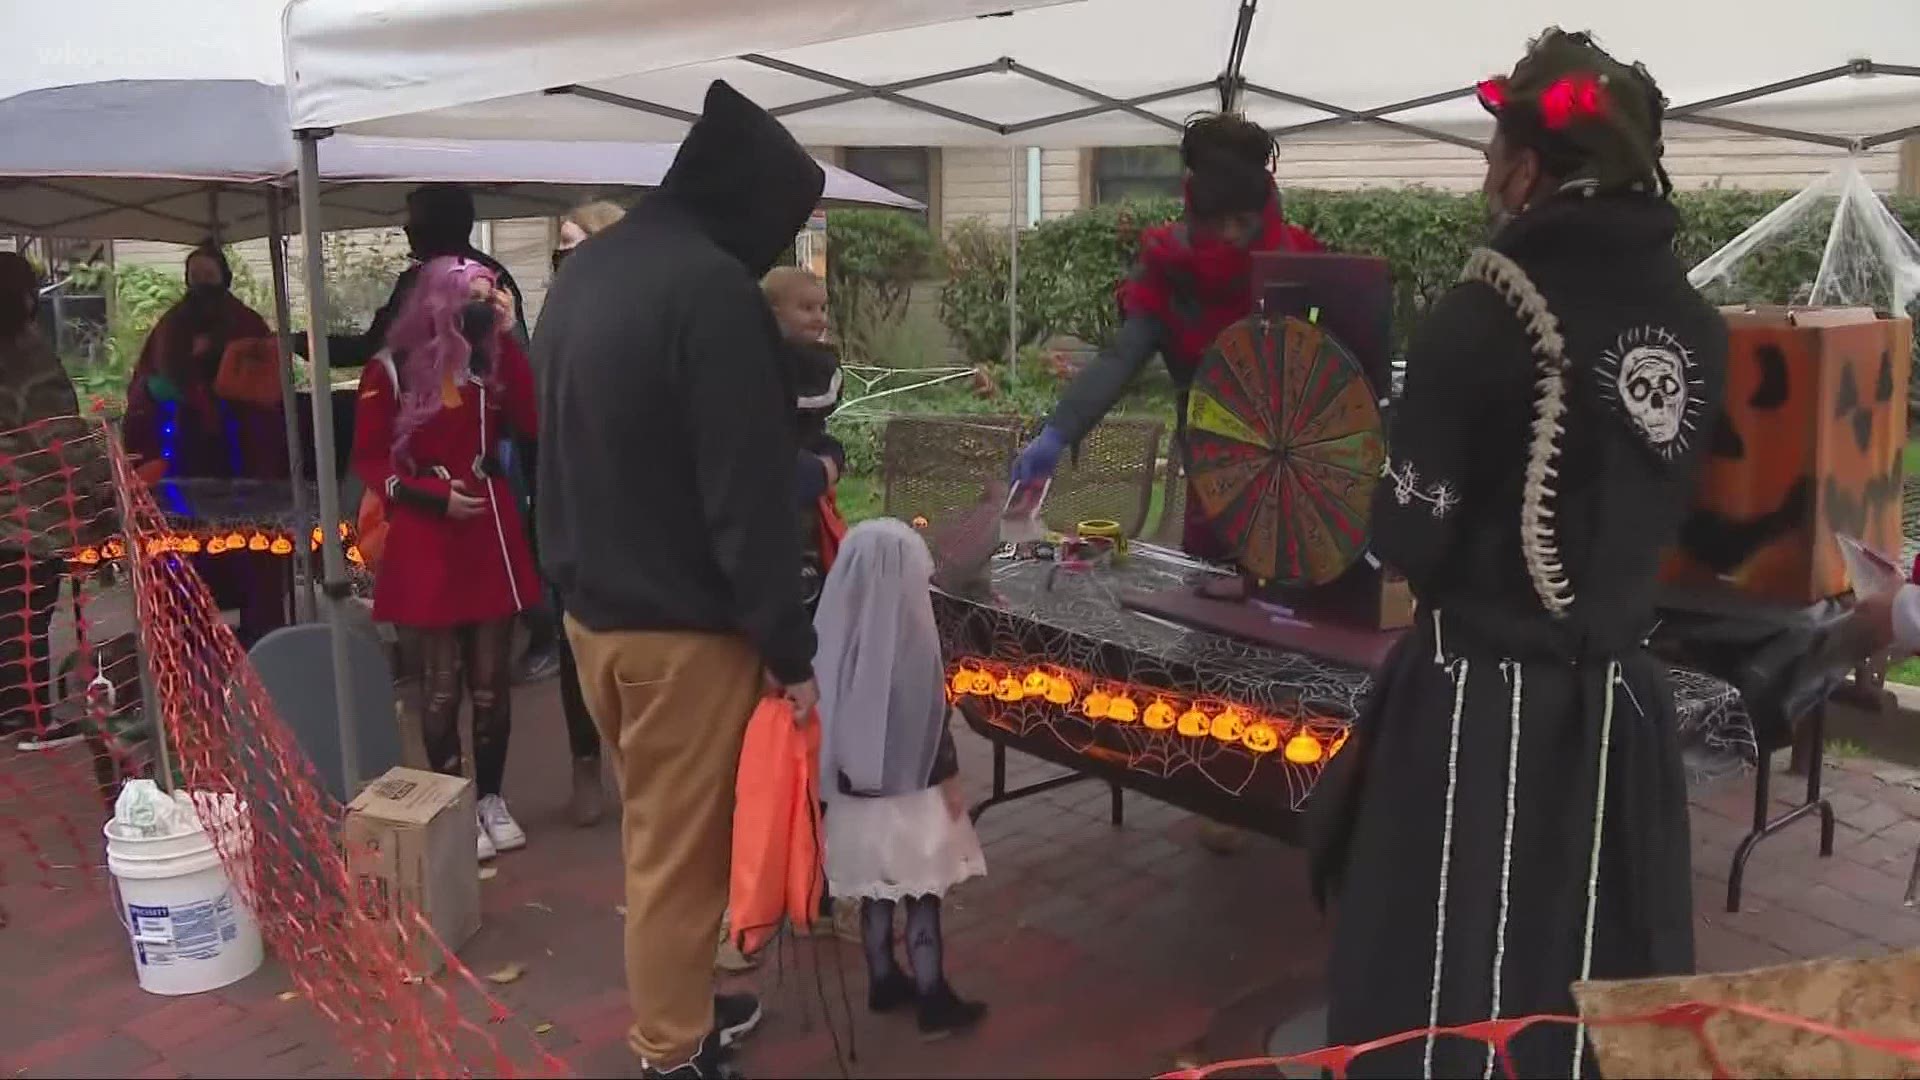 Halloween this year may be scarier than ever. Andrew Horansky reports.